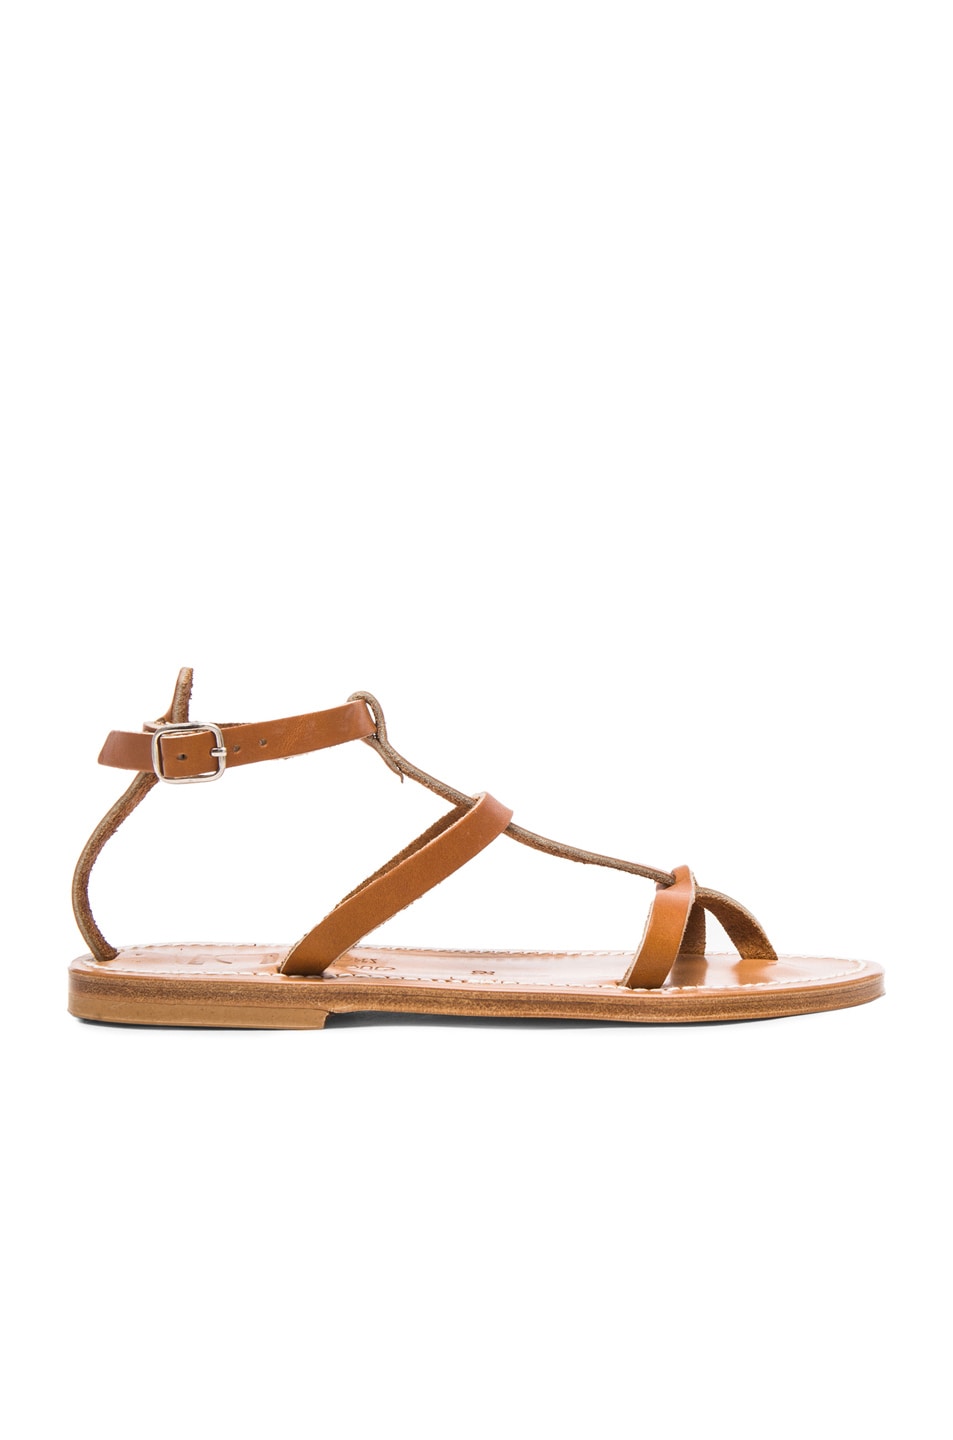 Image 1 of K Jacques Gina Leather Sandals in Natural PUL